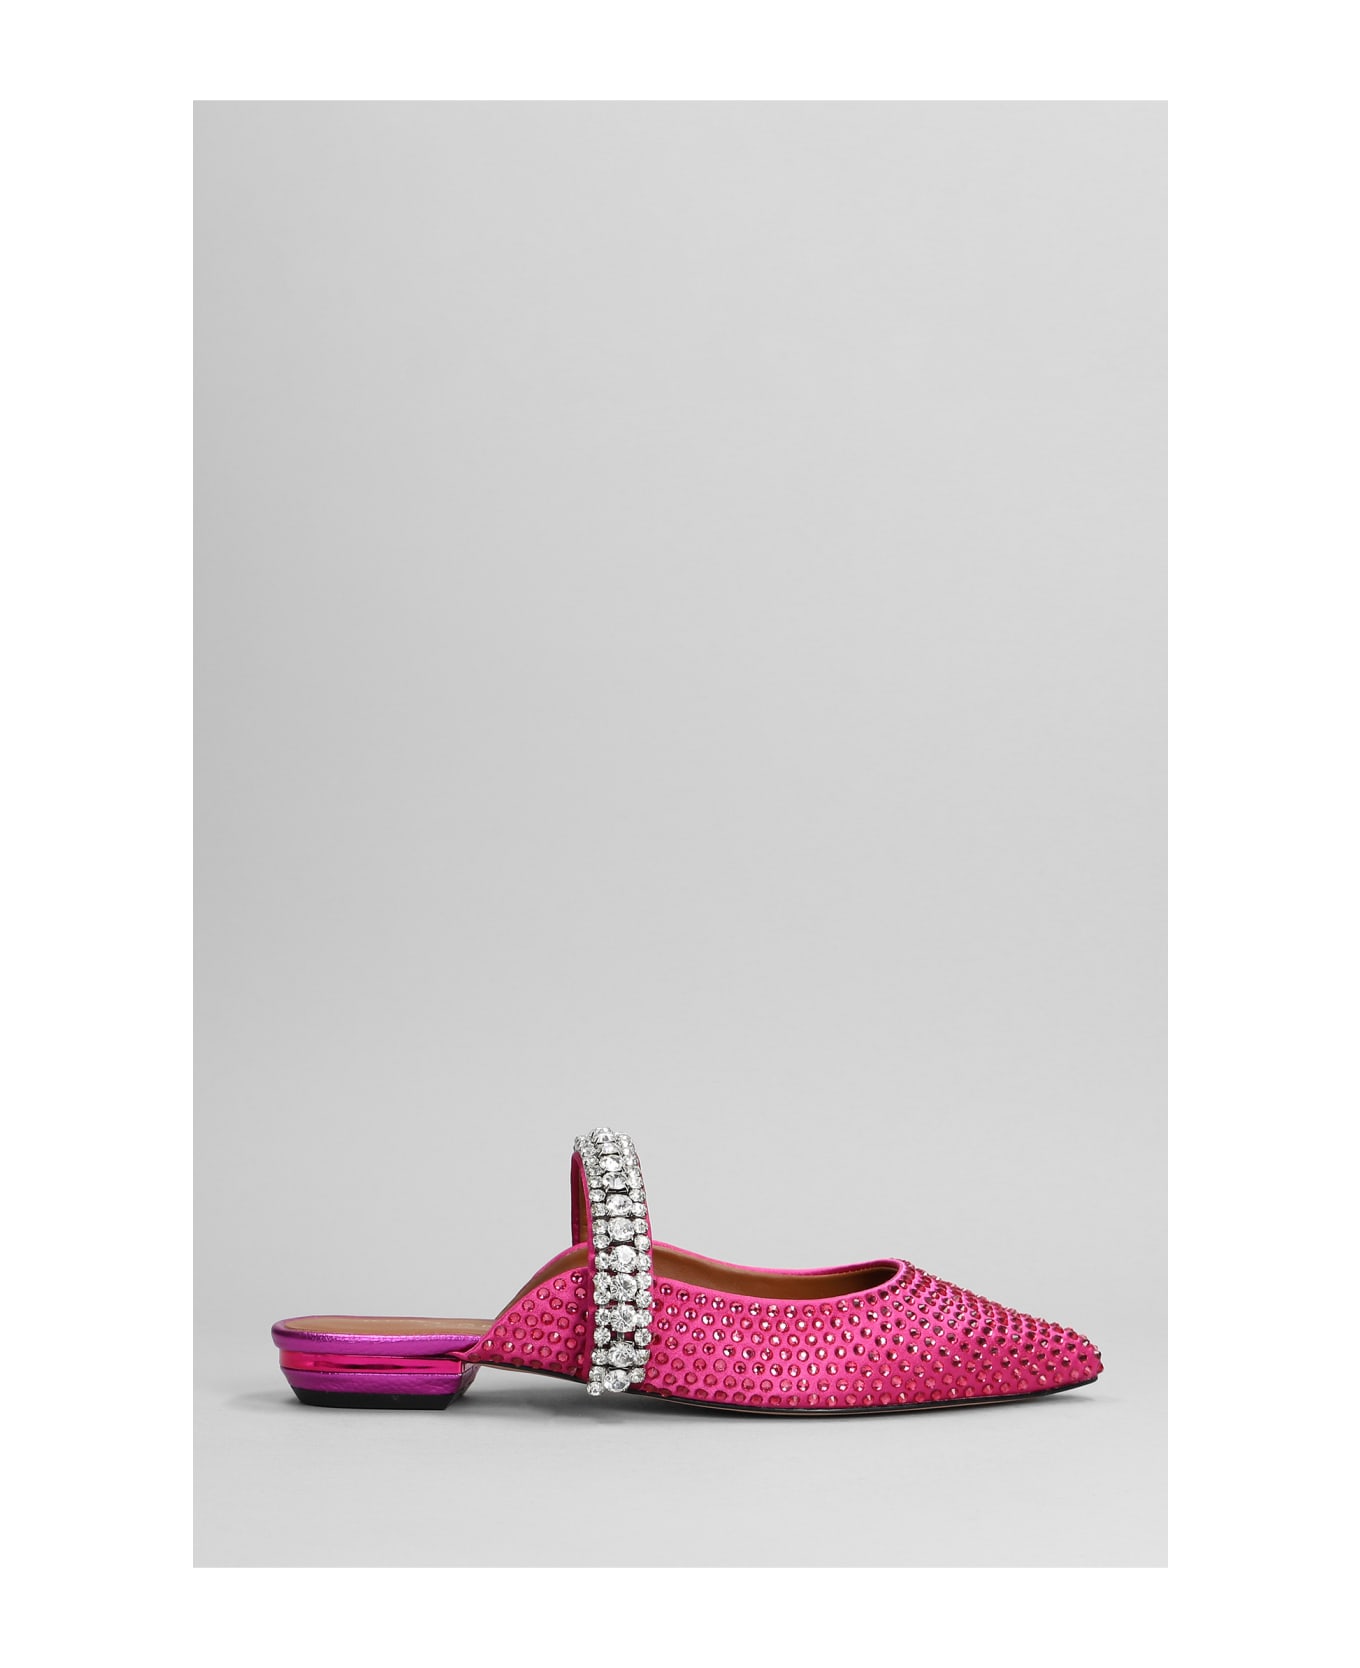 Kurt Geiger Princely Crystals Slipper-mule In Fuxia Satin - fuxia